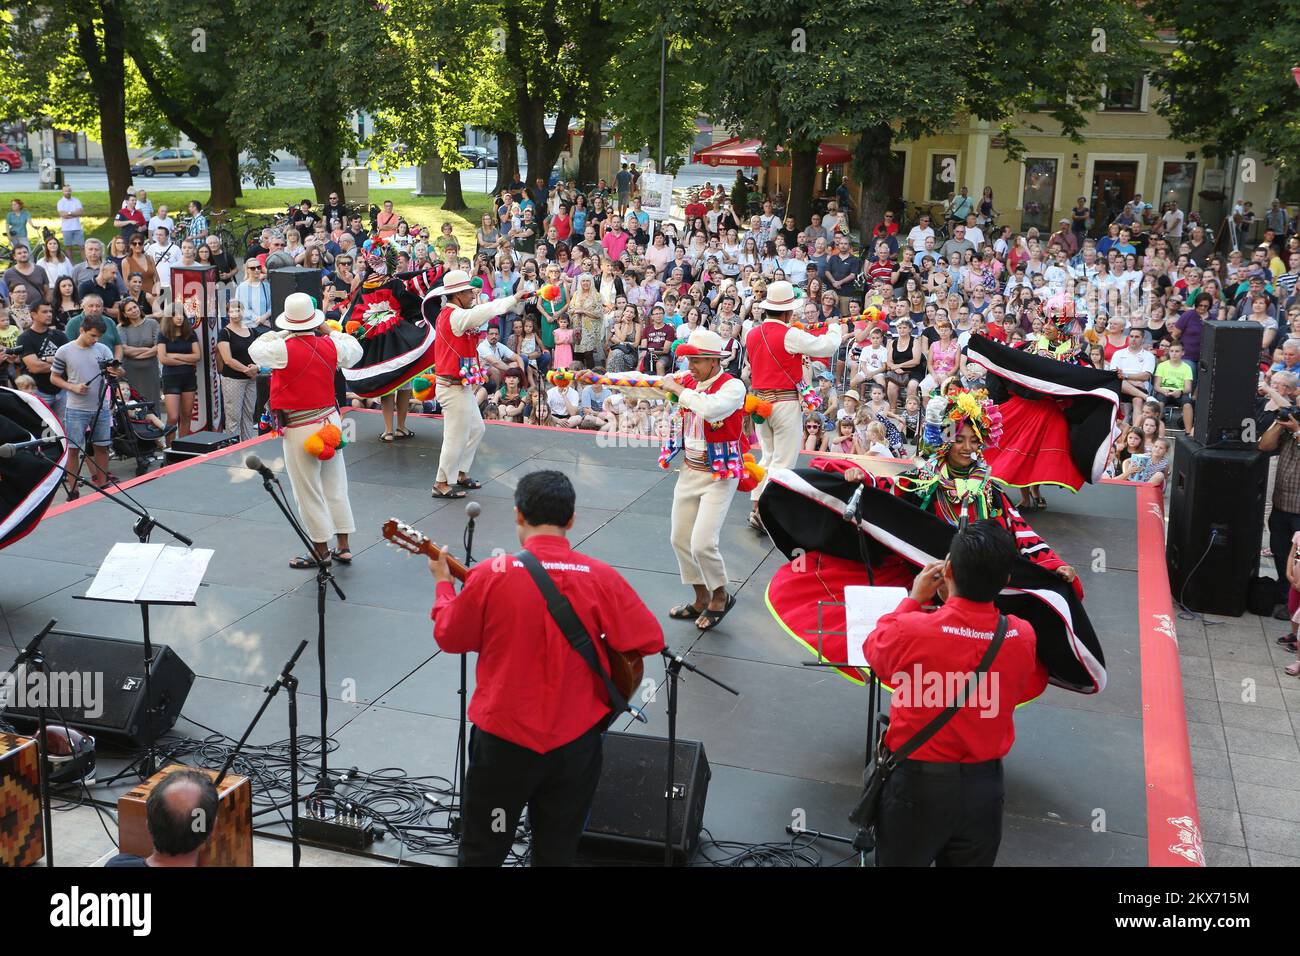 04.07.2018 Karlovac - As part of the 21st International Folklore Festival held in front of the City Theater Zorin Dom, groups from India, Peru and Kenya performed.Group from Peru Photo: Kristina Stedul Fabac/PIXSELL Stock Photo